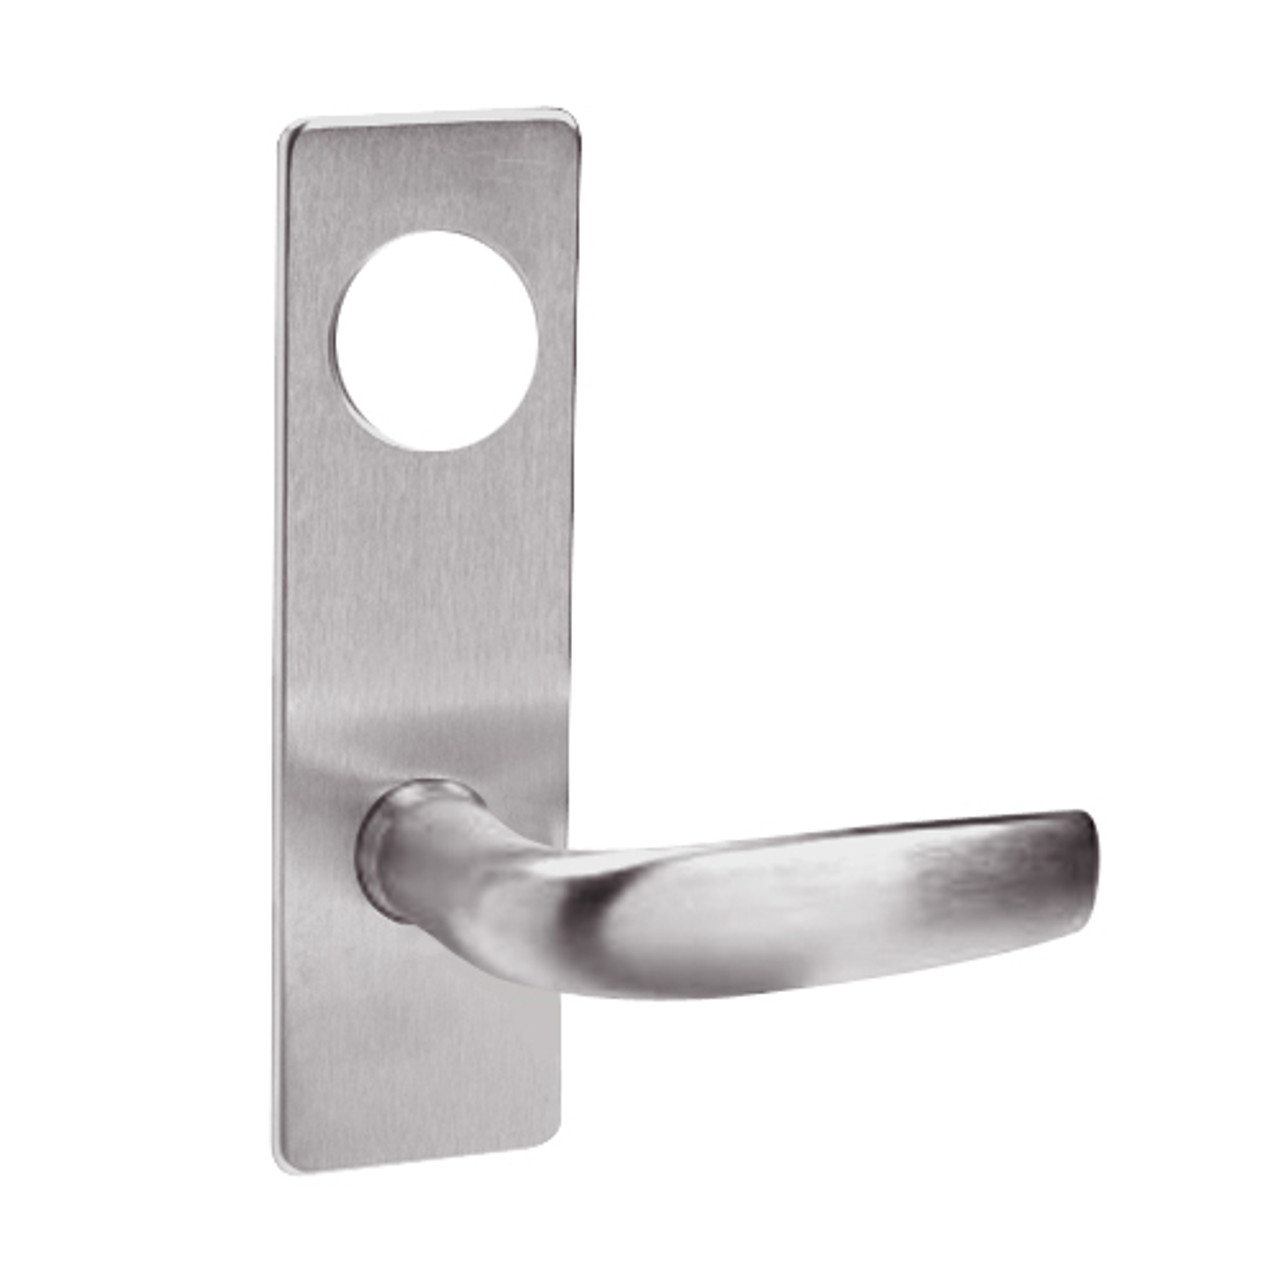 ML2069-CSN-630-LC Corbin Russwin ML2000 Series Mortise Institution Privacy Locksets with Citation Lever in Satin Stainless